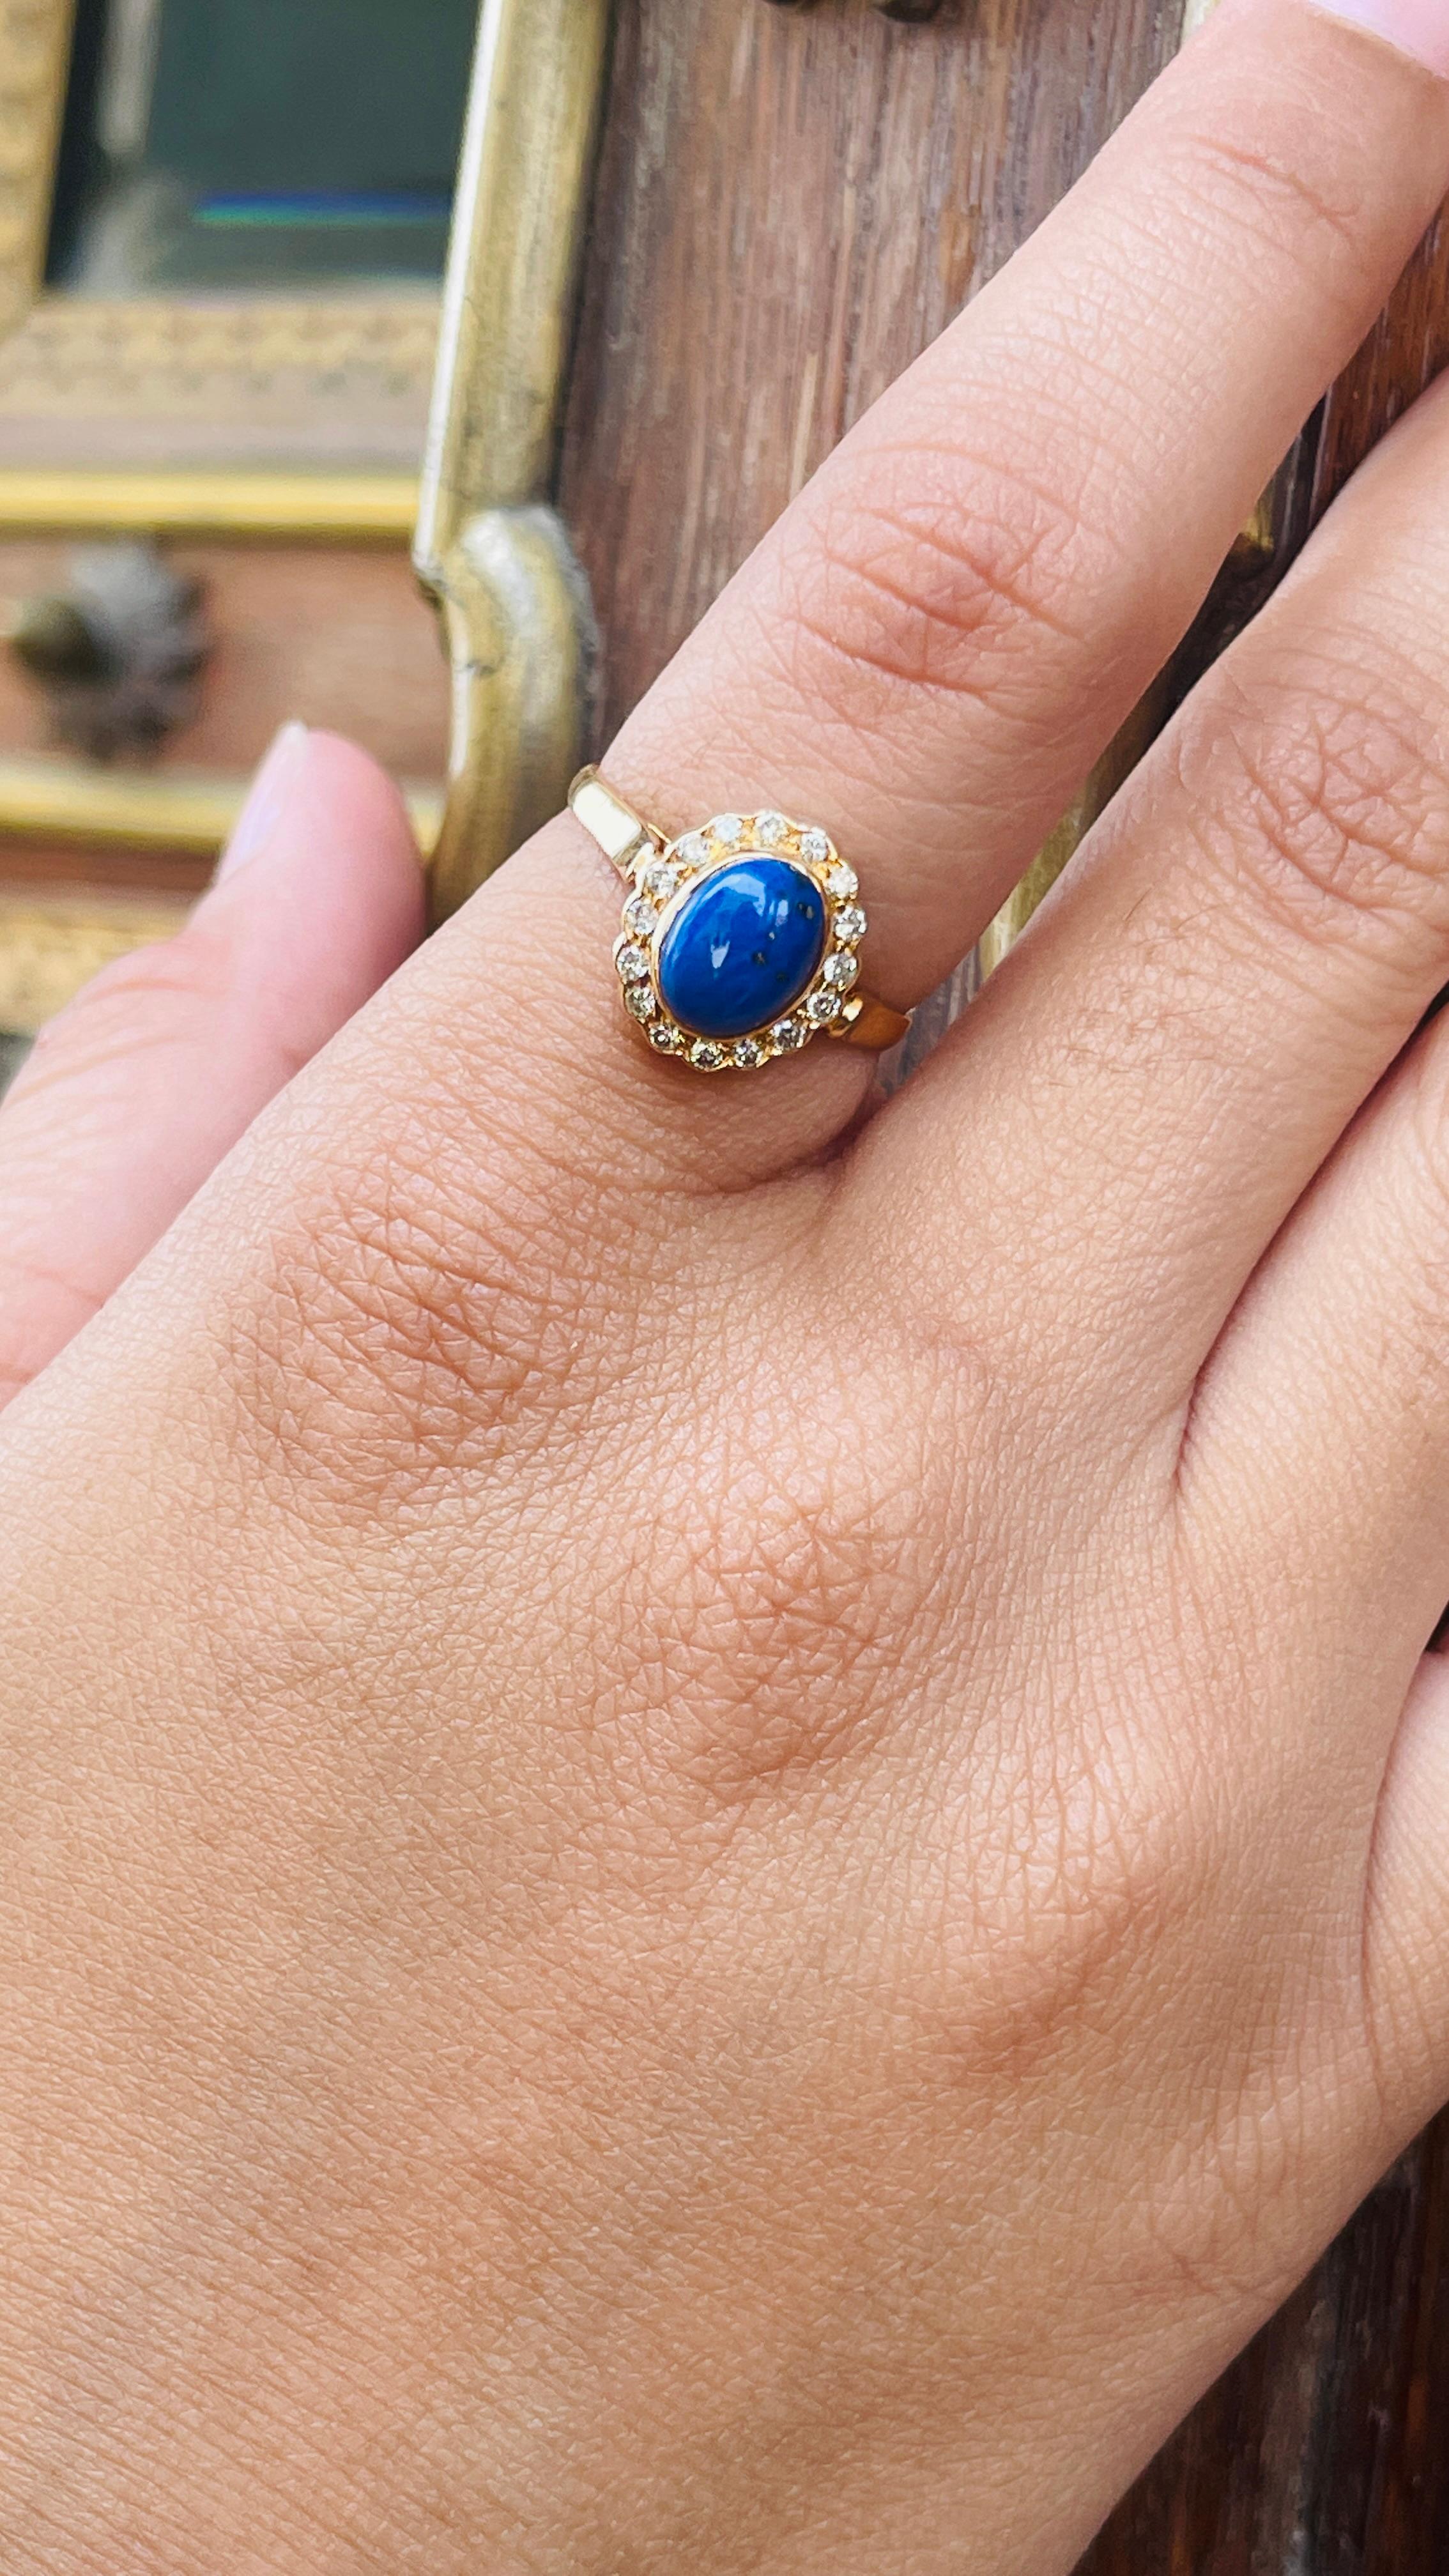 For Sale:  18K Yellow Gold 1.15 Carat Lapis Lazuli with Halo Diamond Cocktail Ring 12